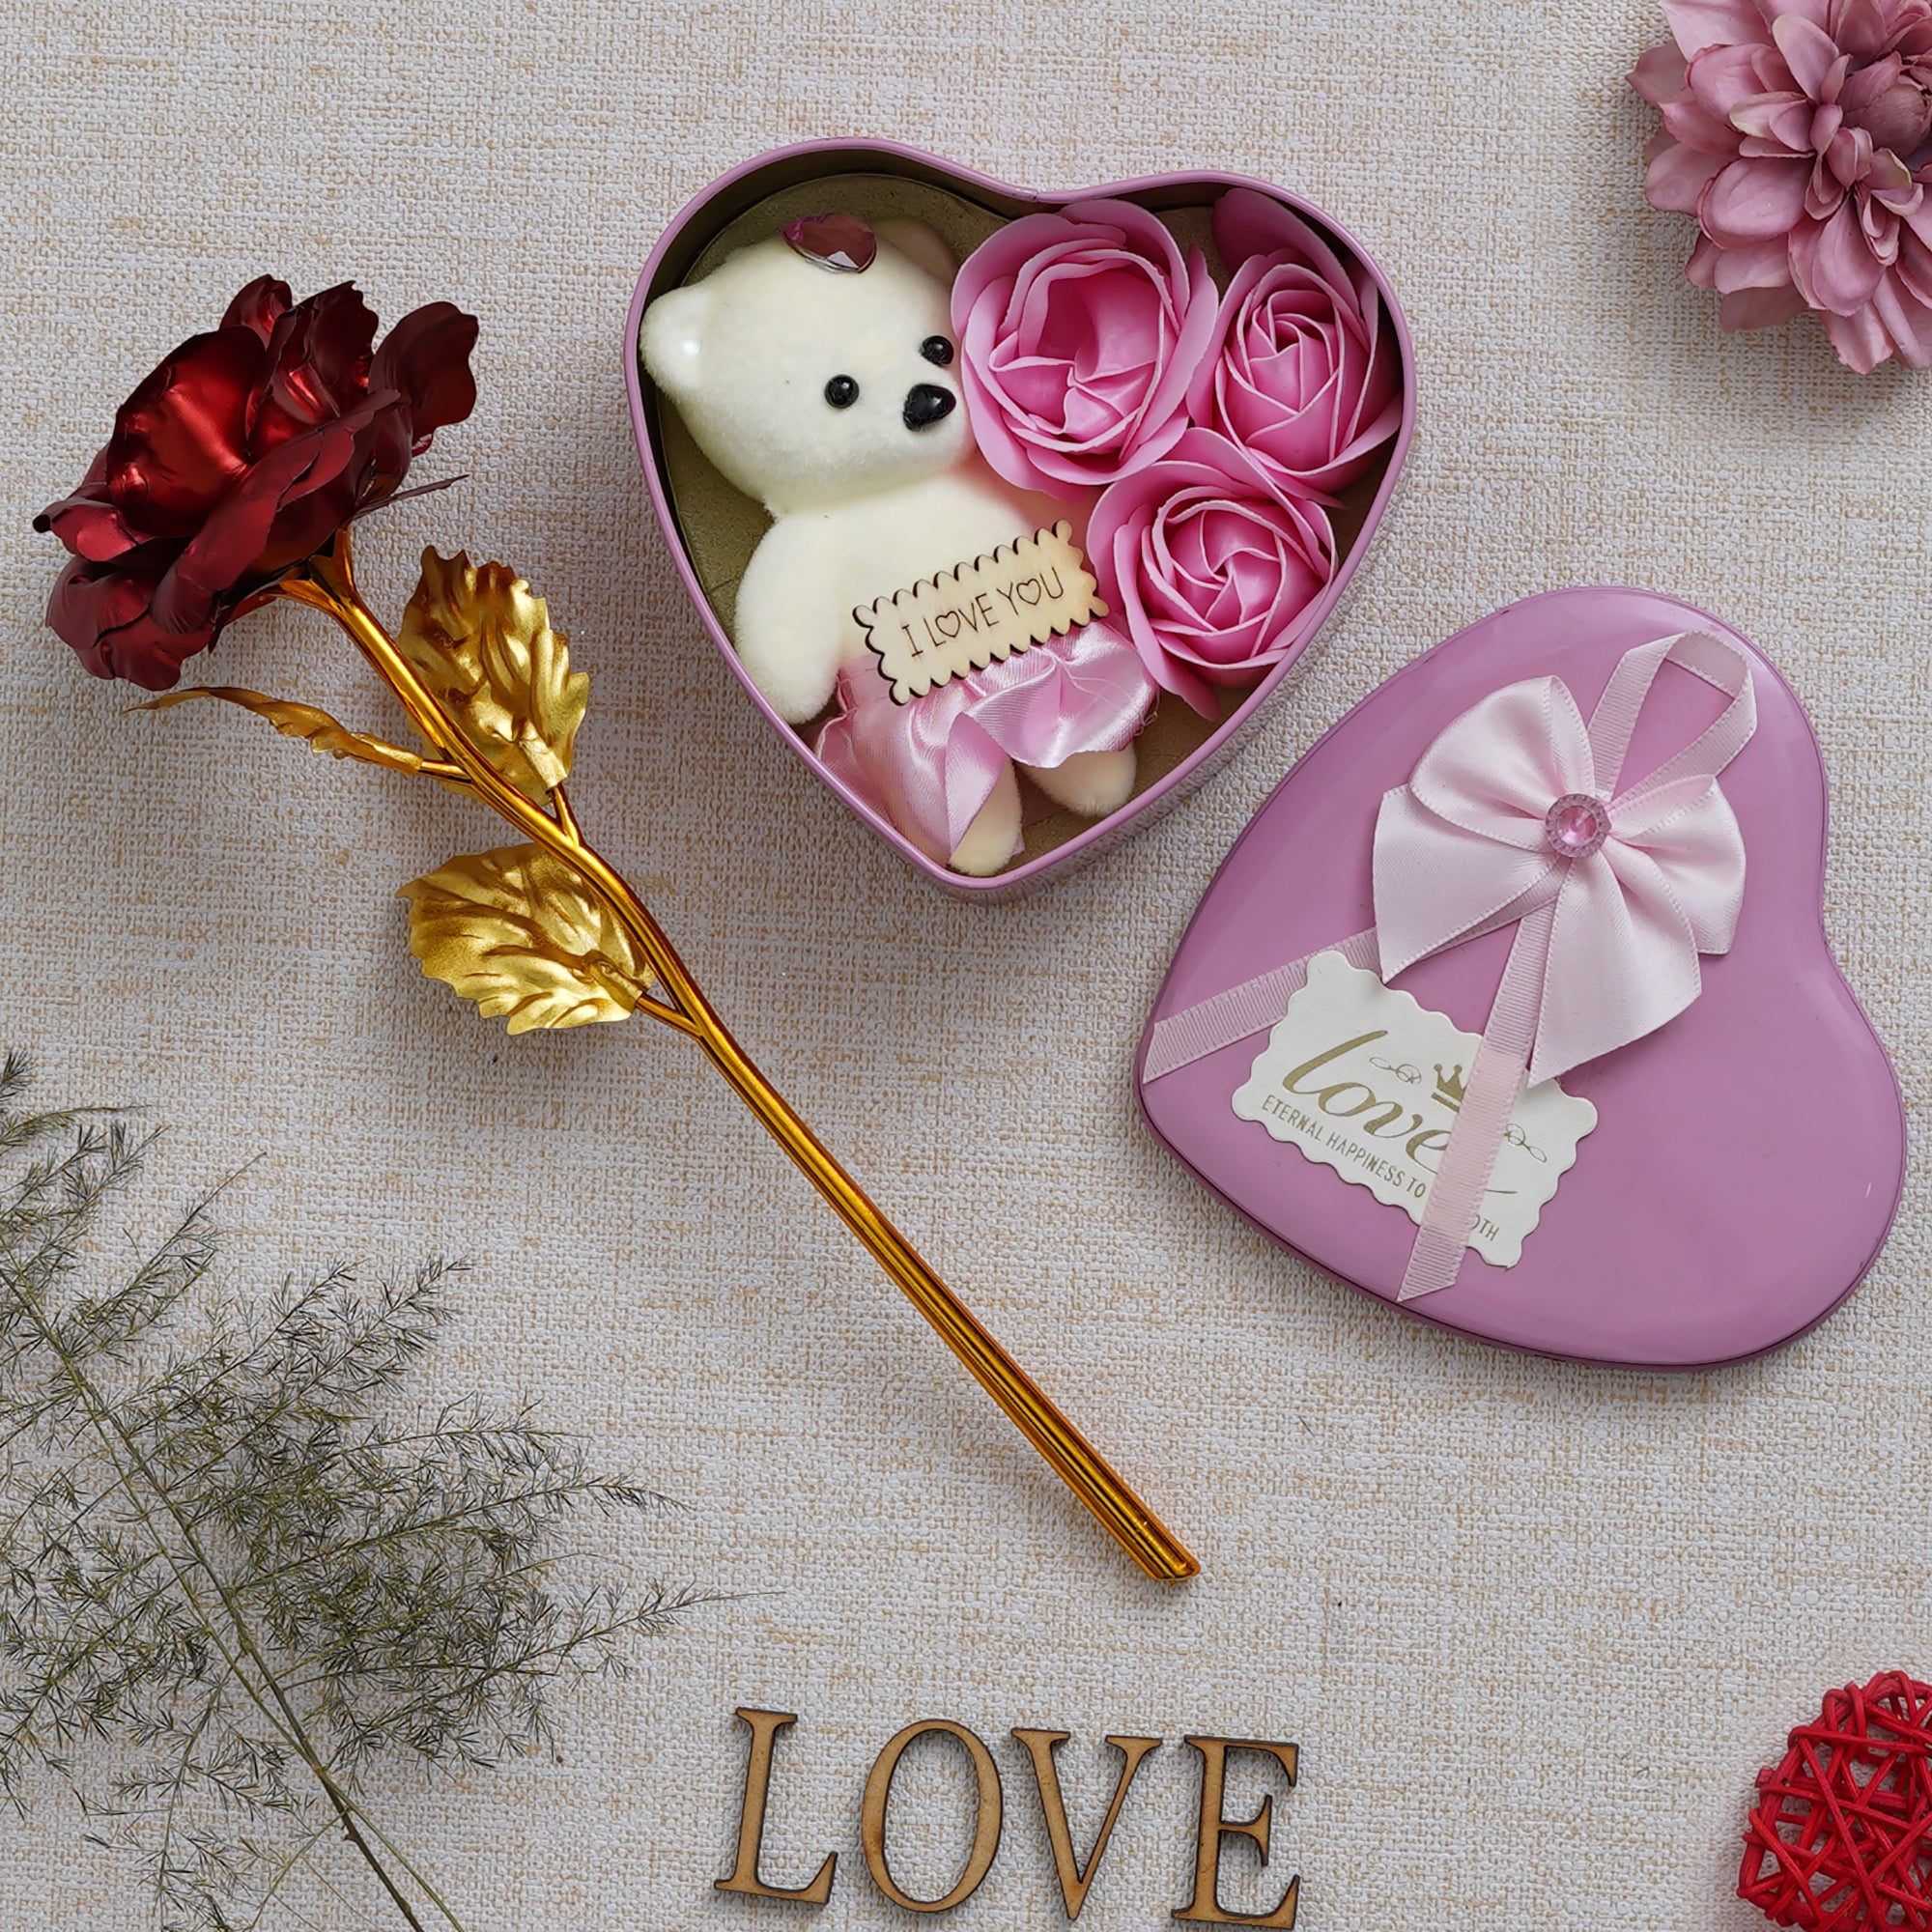 Valentine Combo of Golden Red Rose Gift Set, Pink Heart Shaped Gift Box with Teddy and Roses